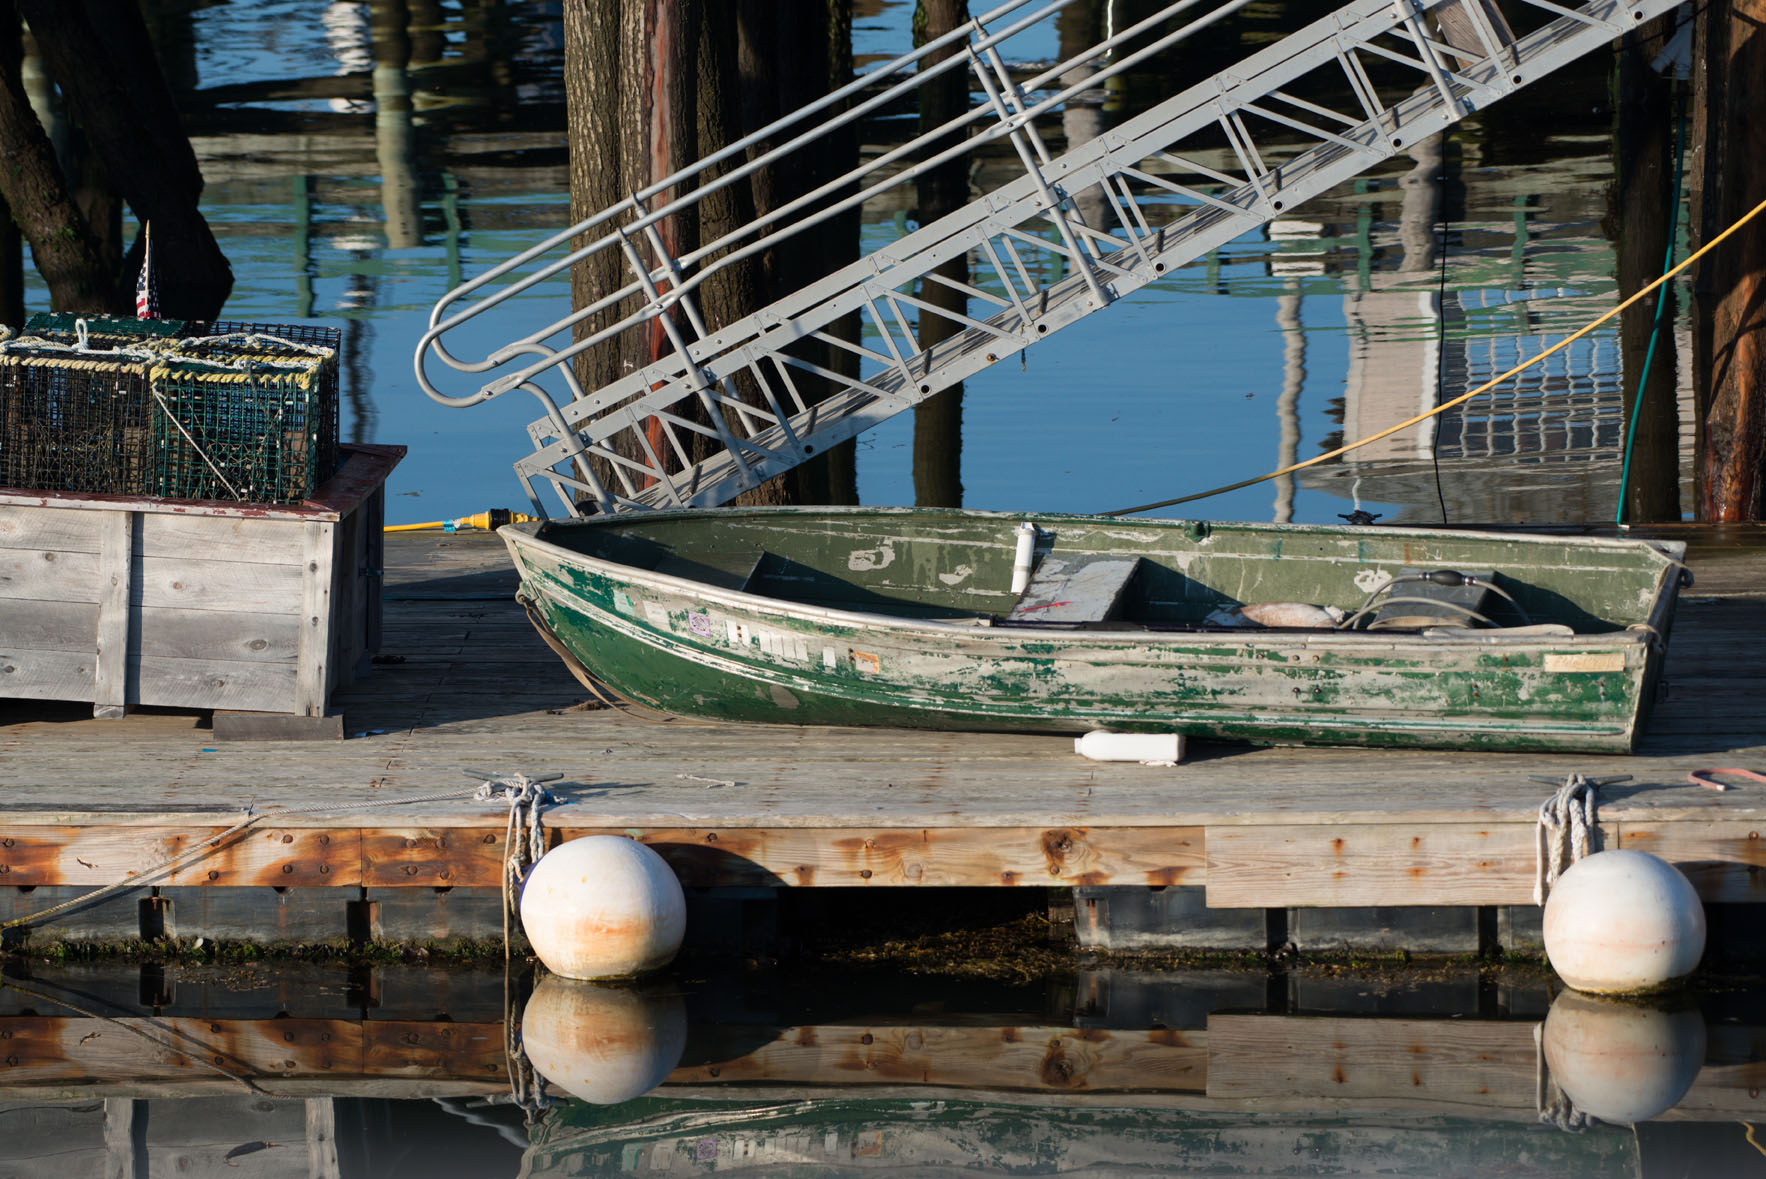 Special Access: Inside a Working Boatyard Photography Class